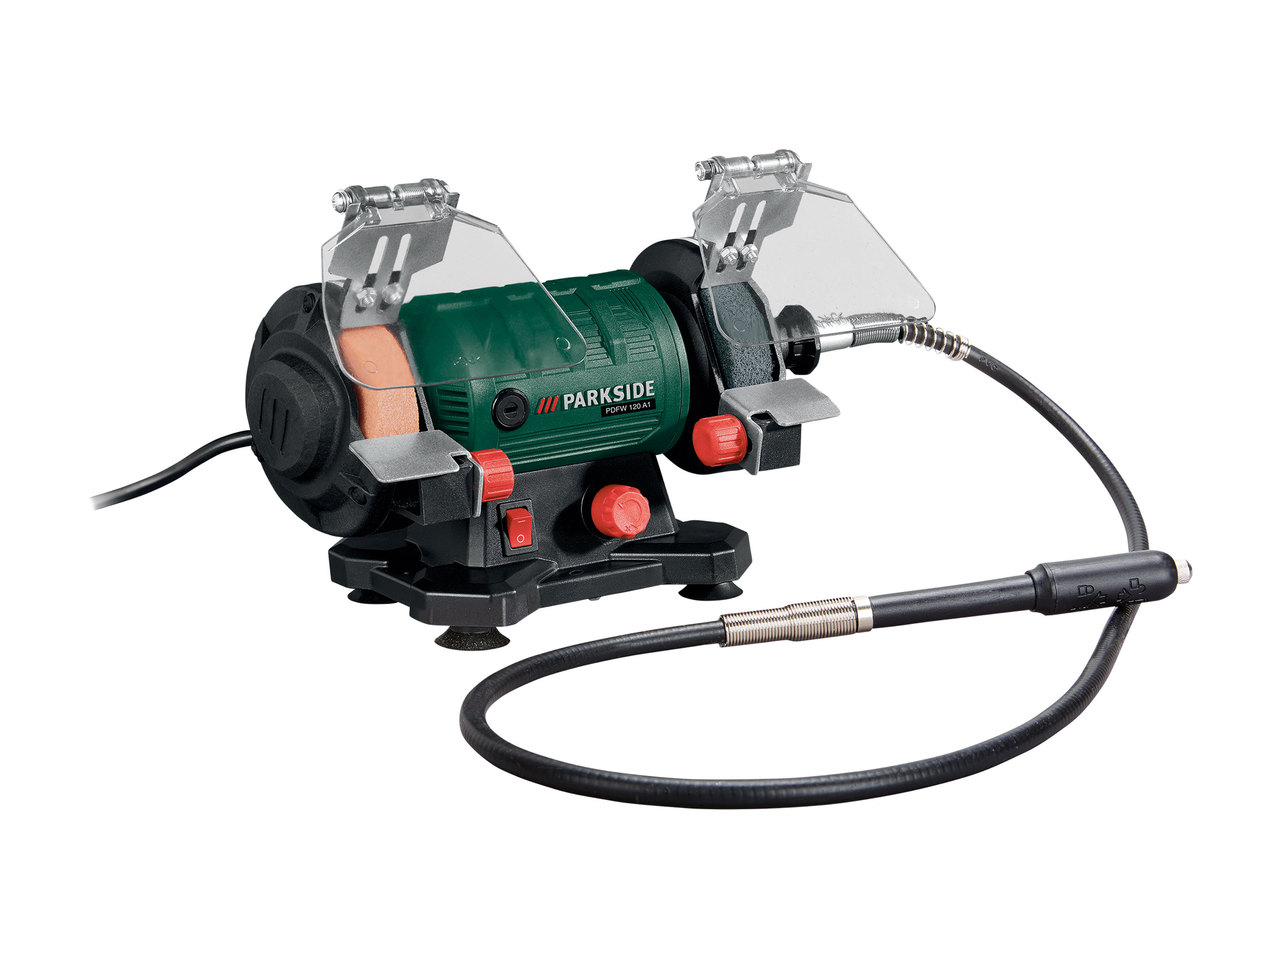 Parkside Double Bench Grinder with Flexible Drive Shaft1